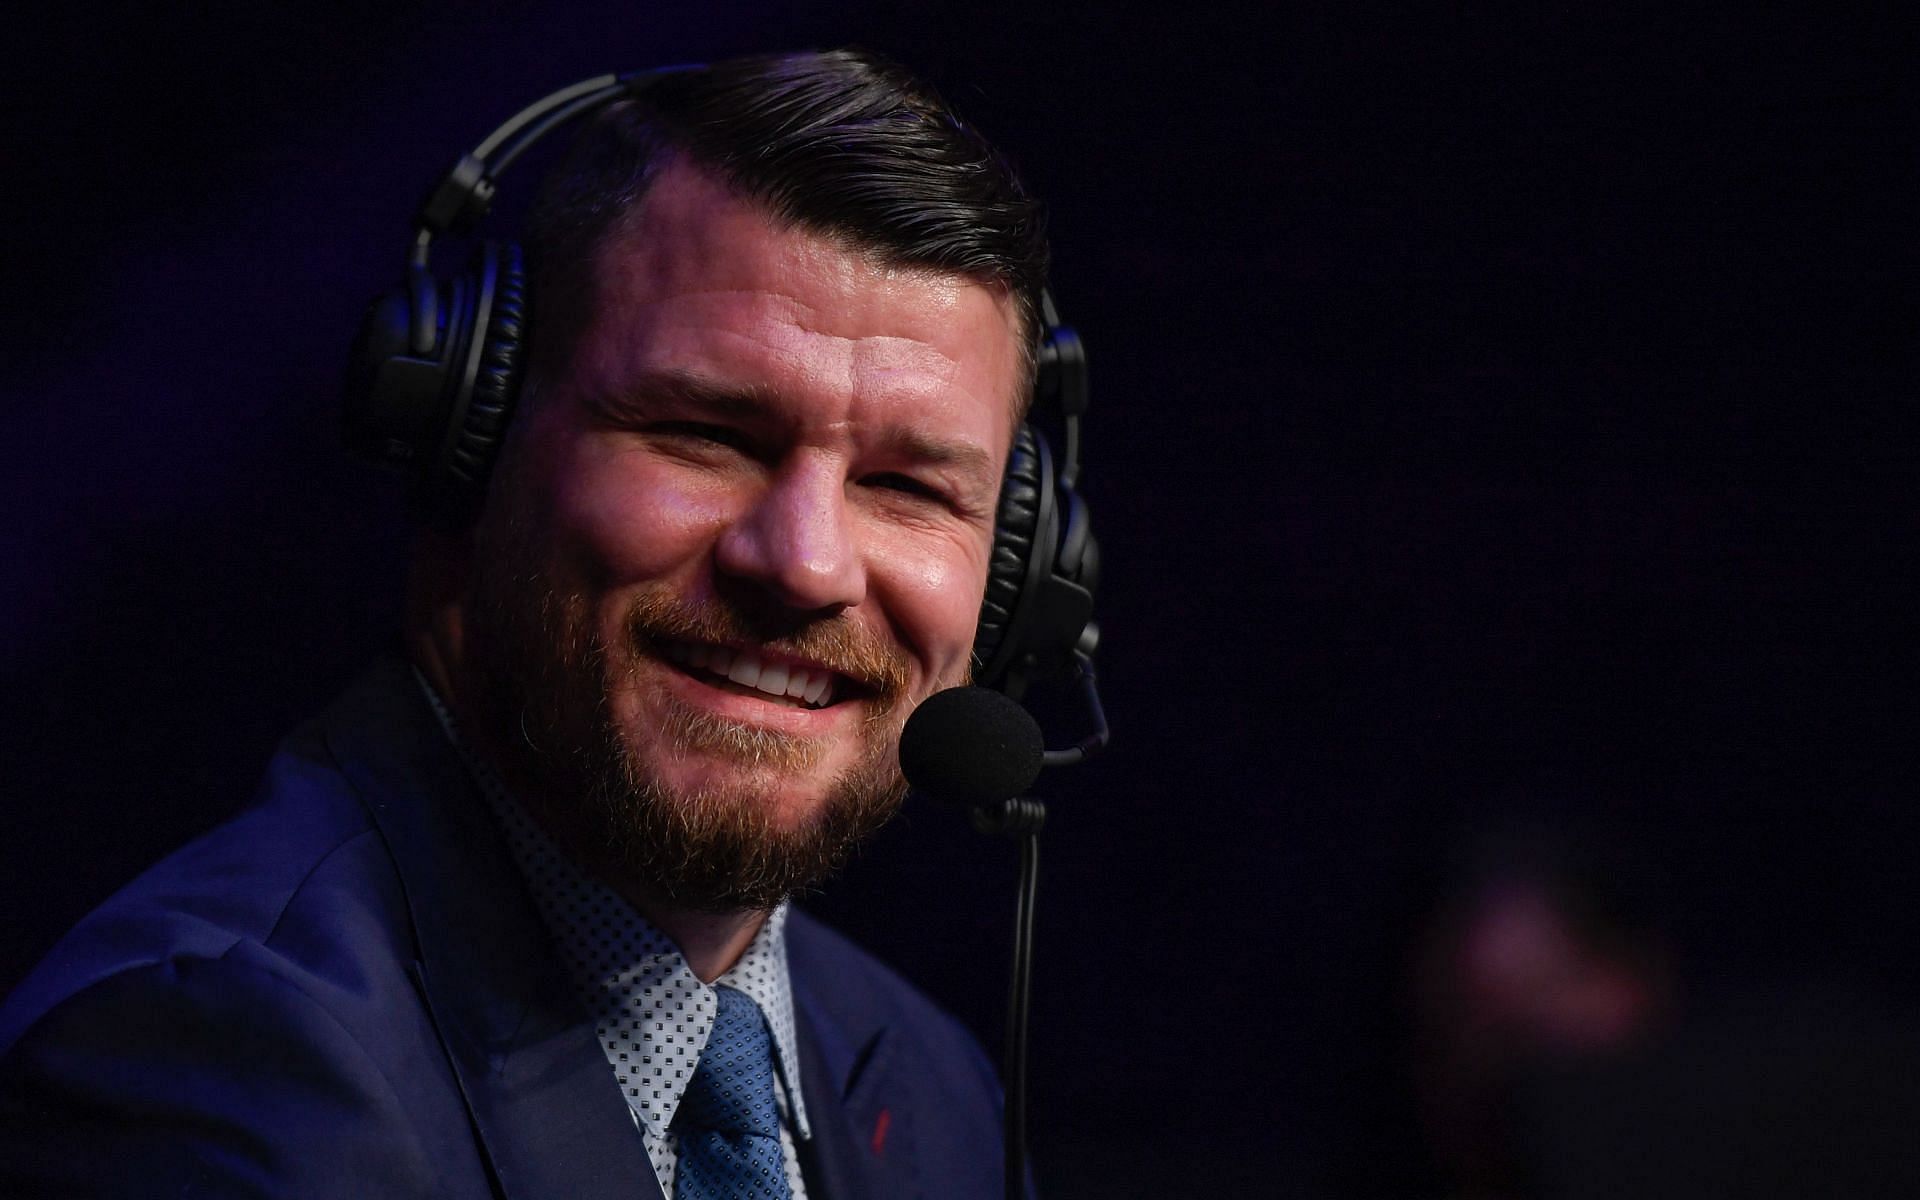 Michael Bisping reveals new details about gym altercation lawsuit